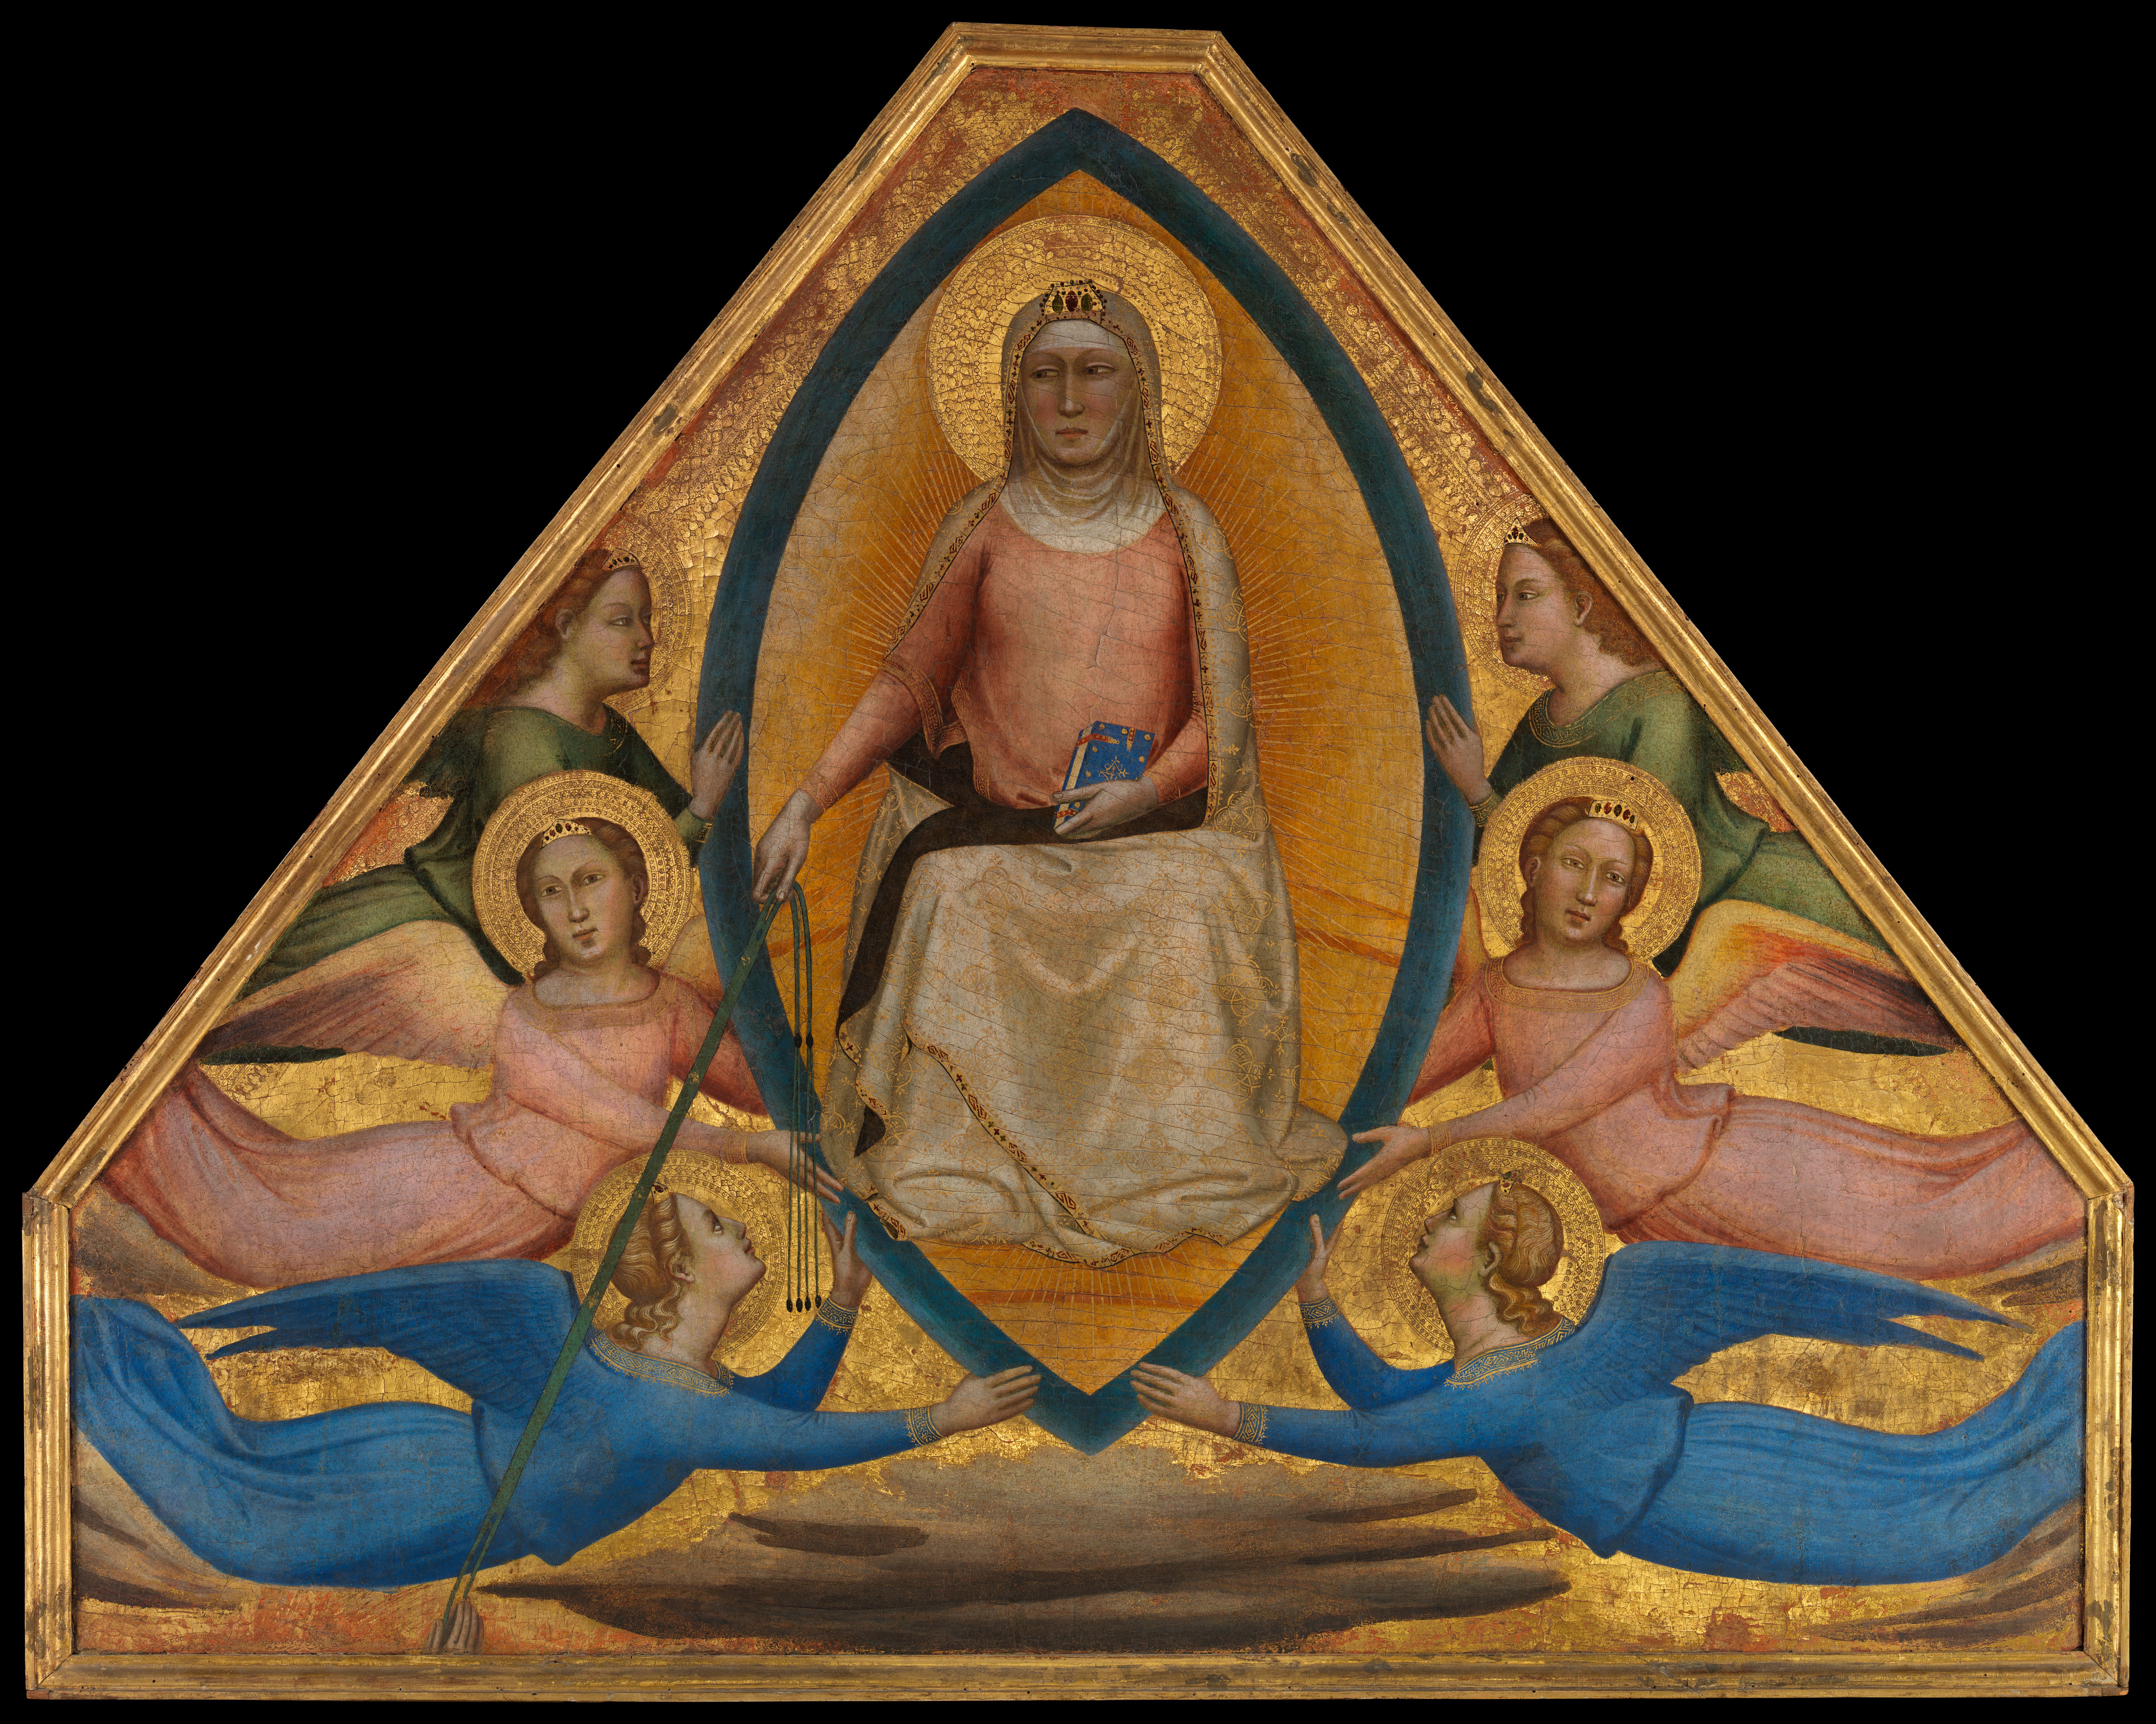 The Angelus - Assumption of the Blessed Virgin Mary Catholic